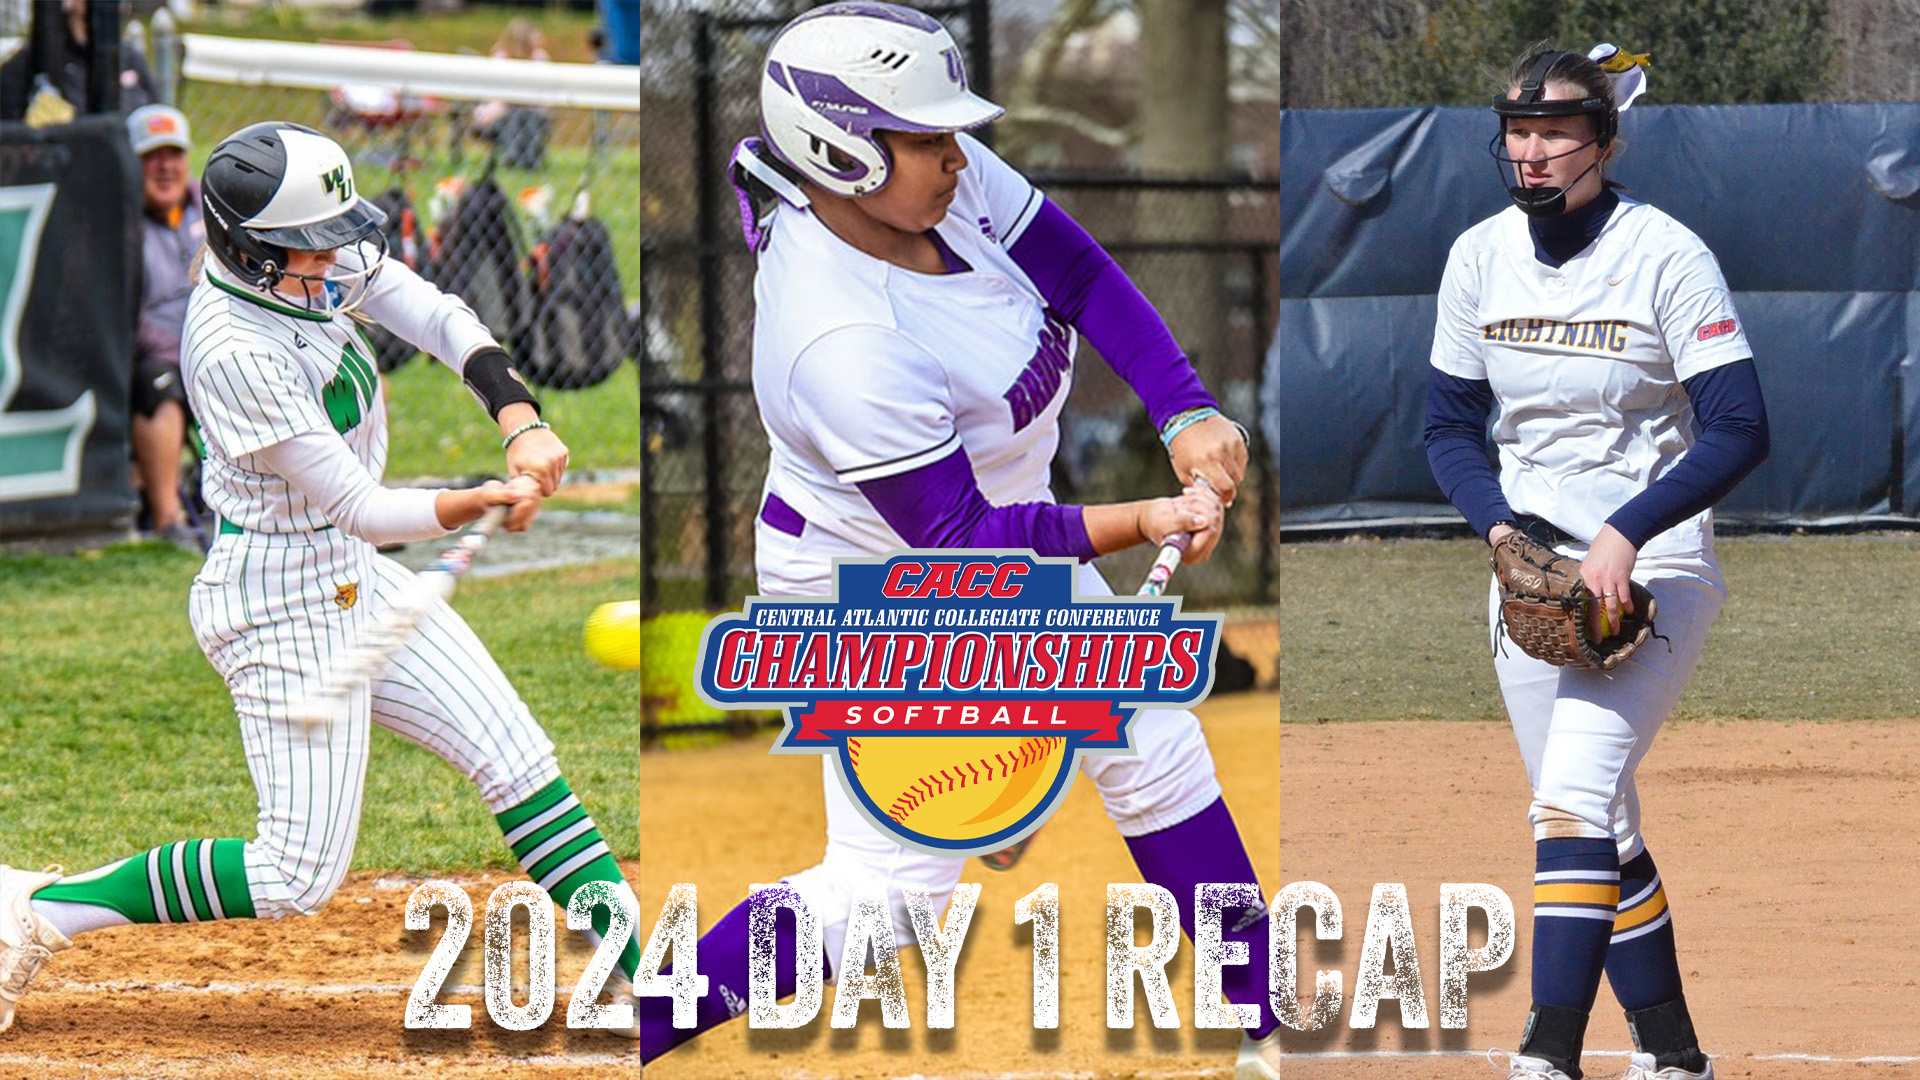 Top-3 Seeds All Advance on Day 1 of CACC Softball Tournament